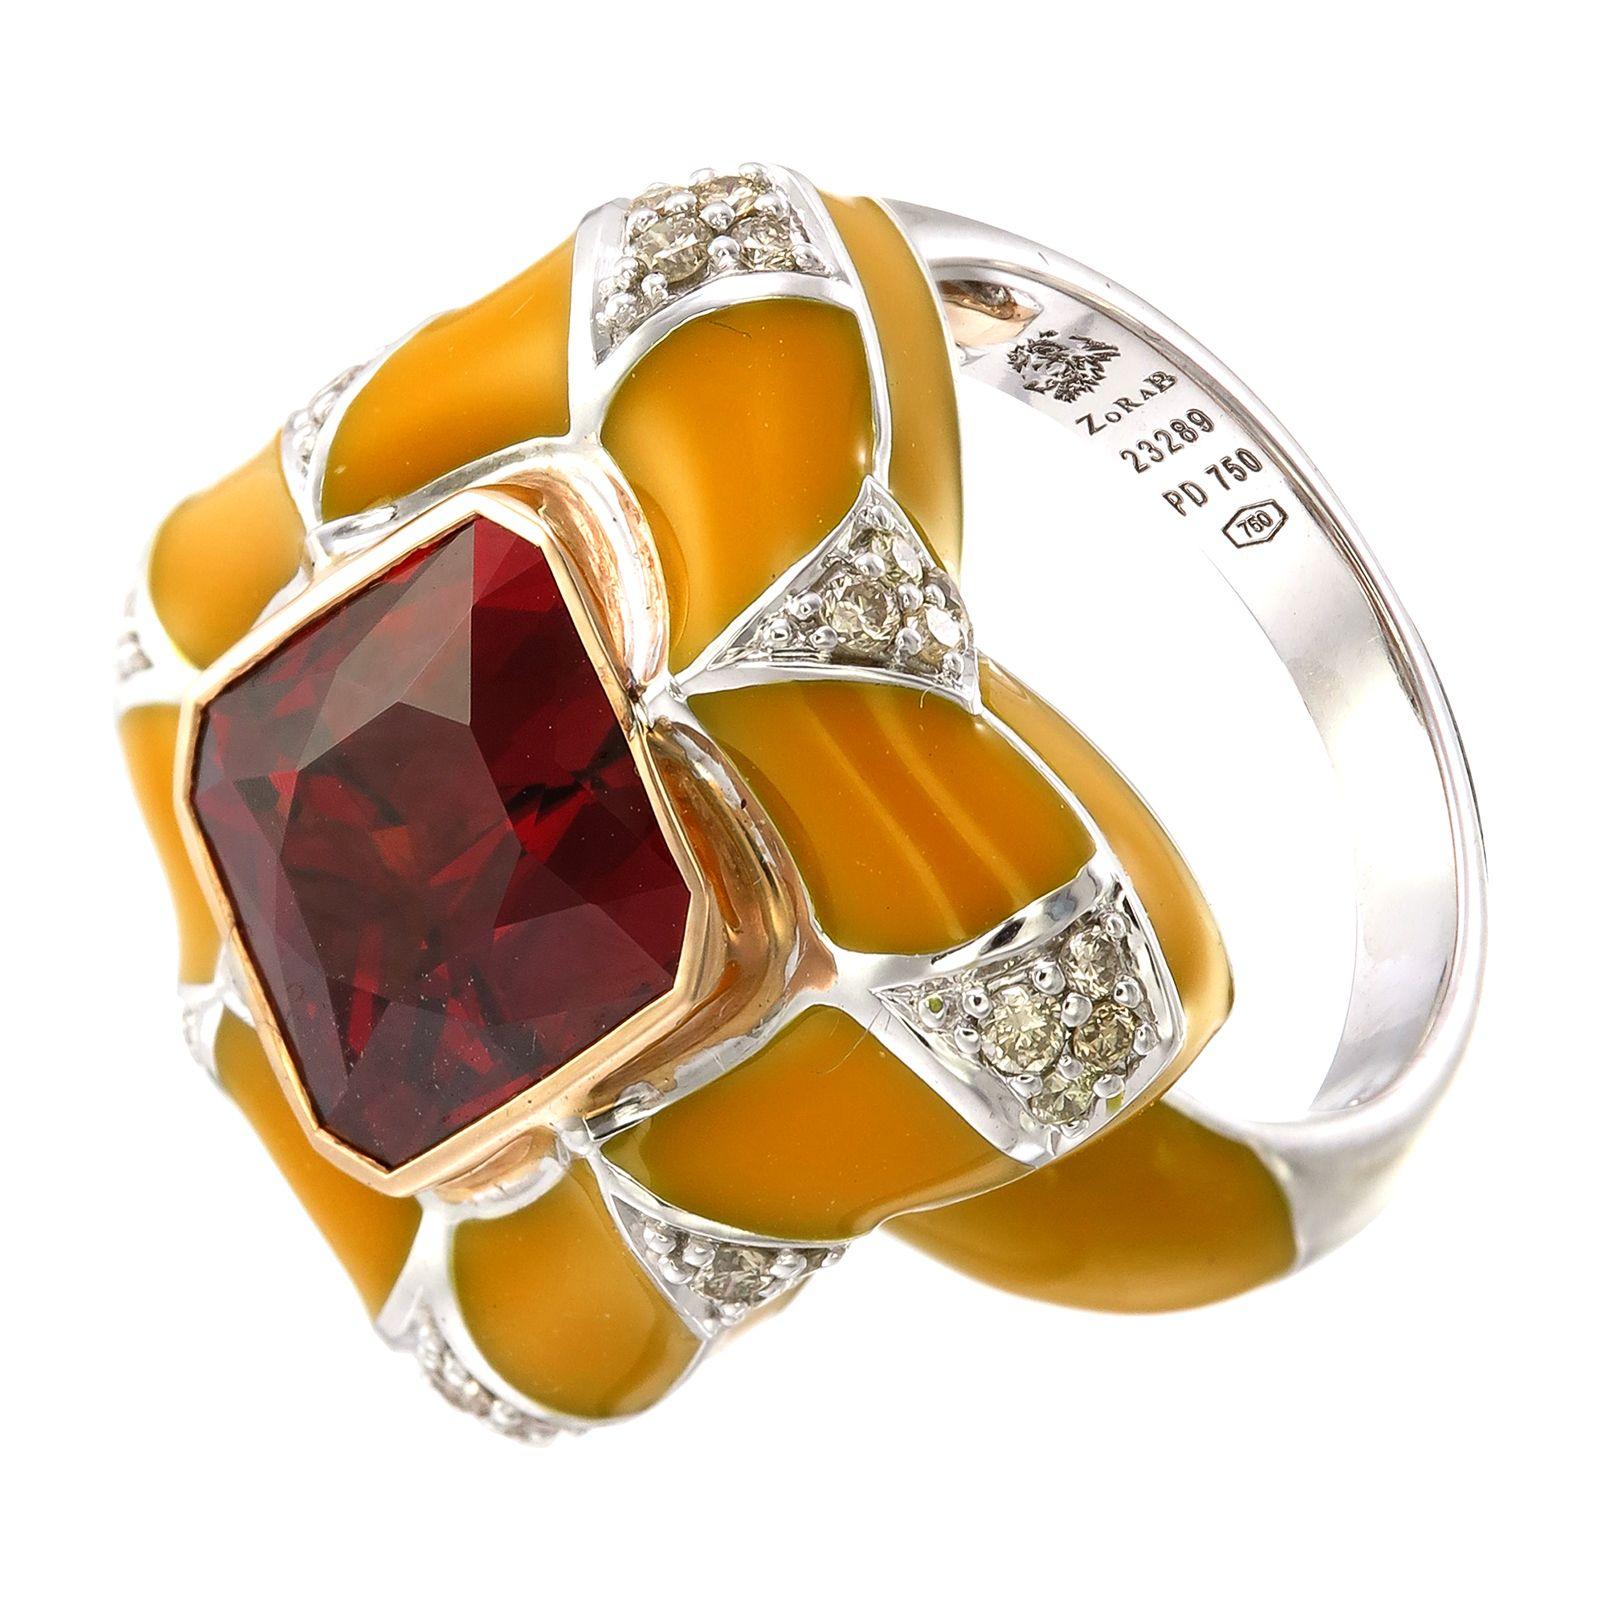 A 7.80-carat Spessartite Garnet on a pillow of yellow enamel encased in 0.41-carat Diamond-paved Palladium and 18K Gold can transform you to a magical place and a time long forgotten. 

This ring, as with all Zorab Creation pieces, are sent with a